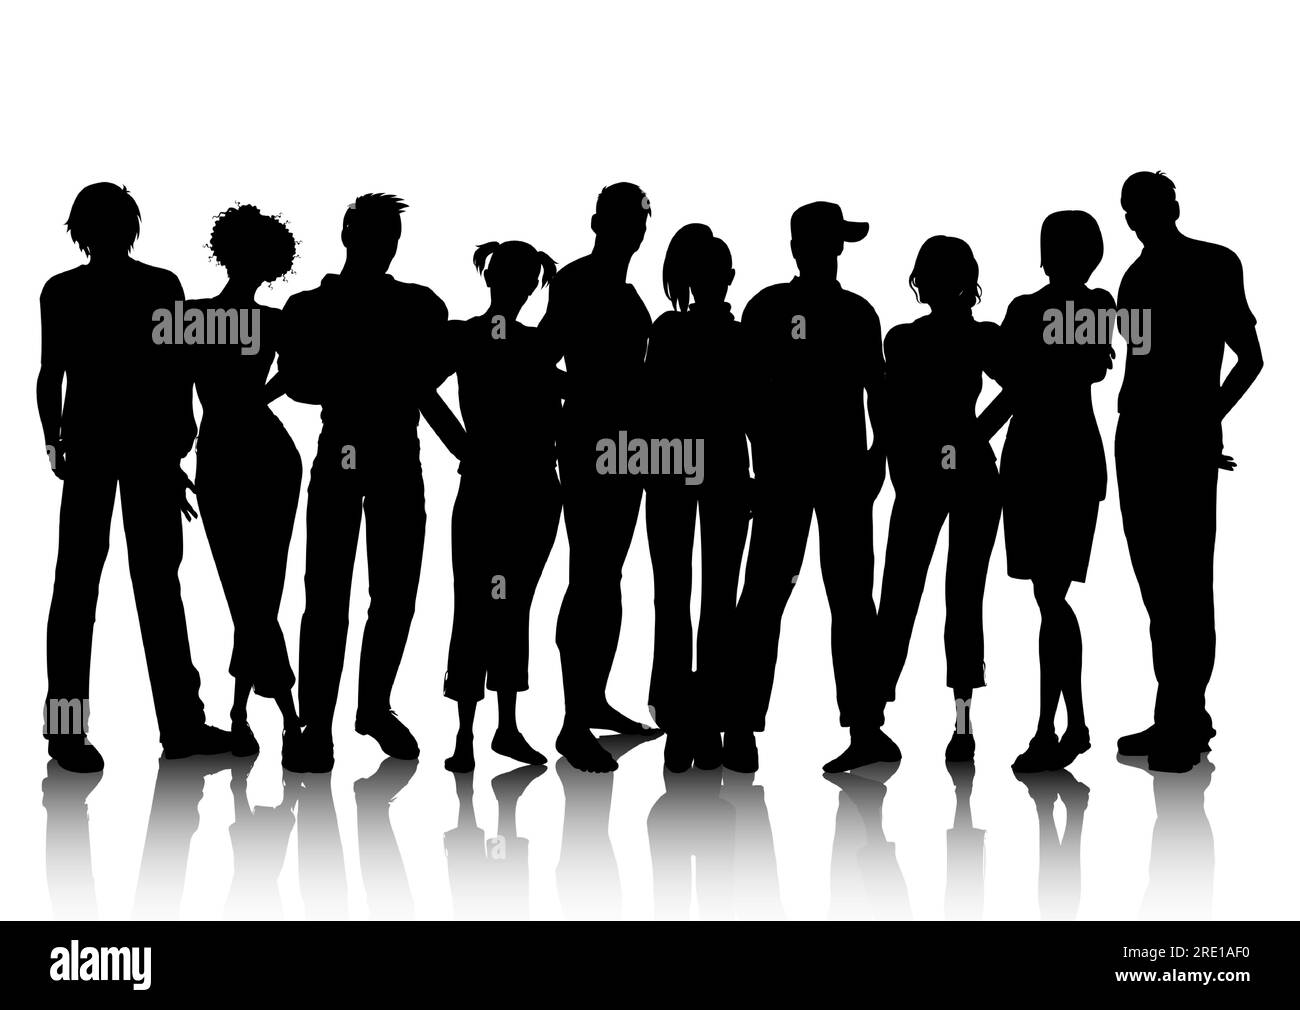 Silhouette of a large crowd of people Stock Vector